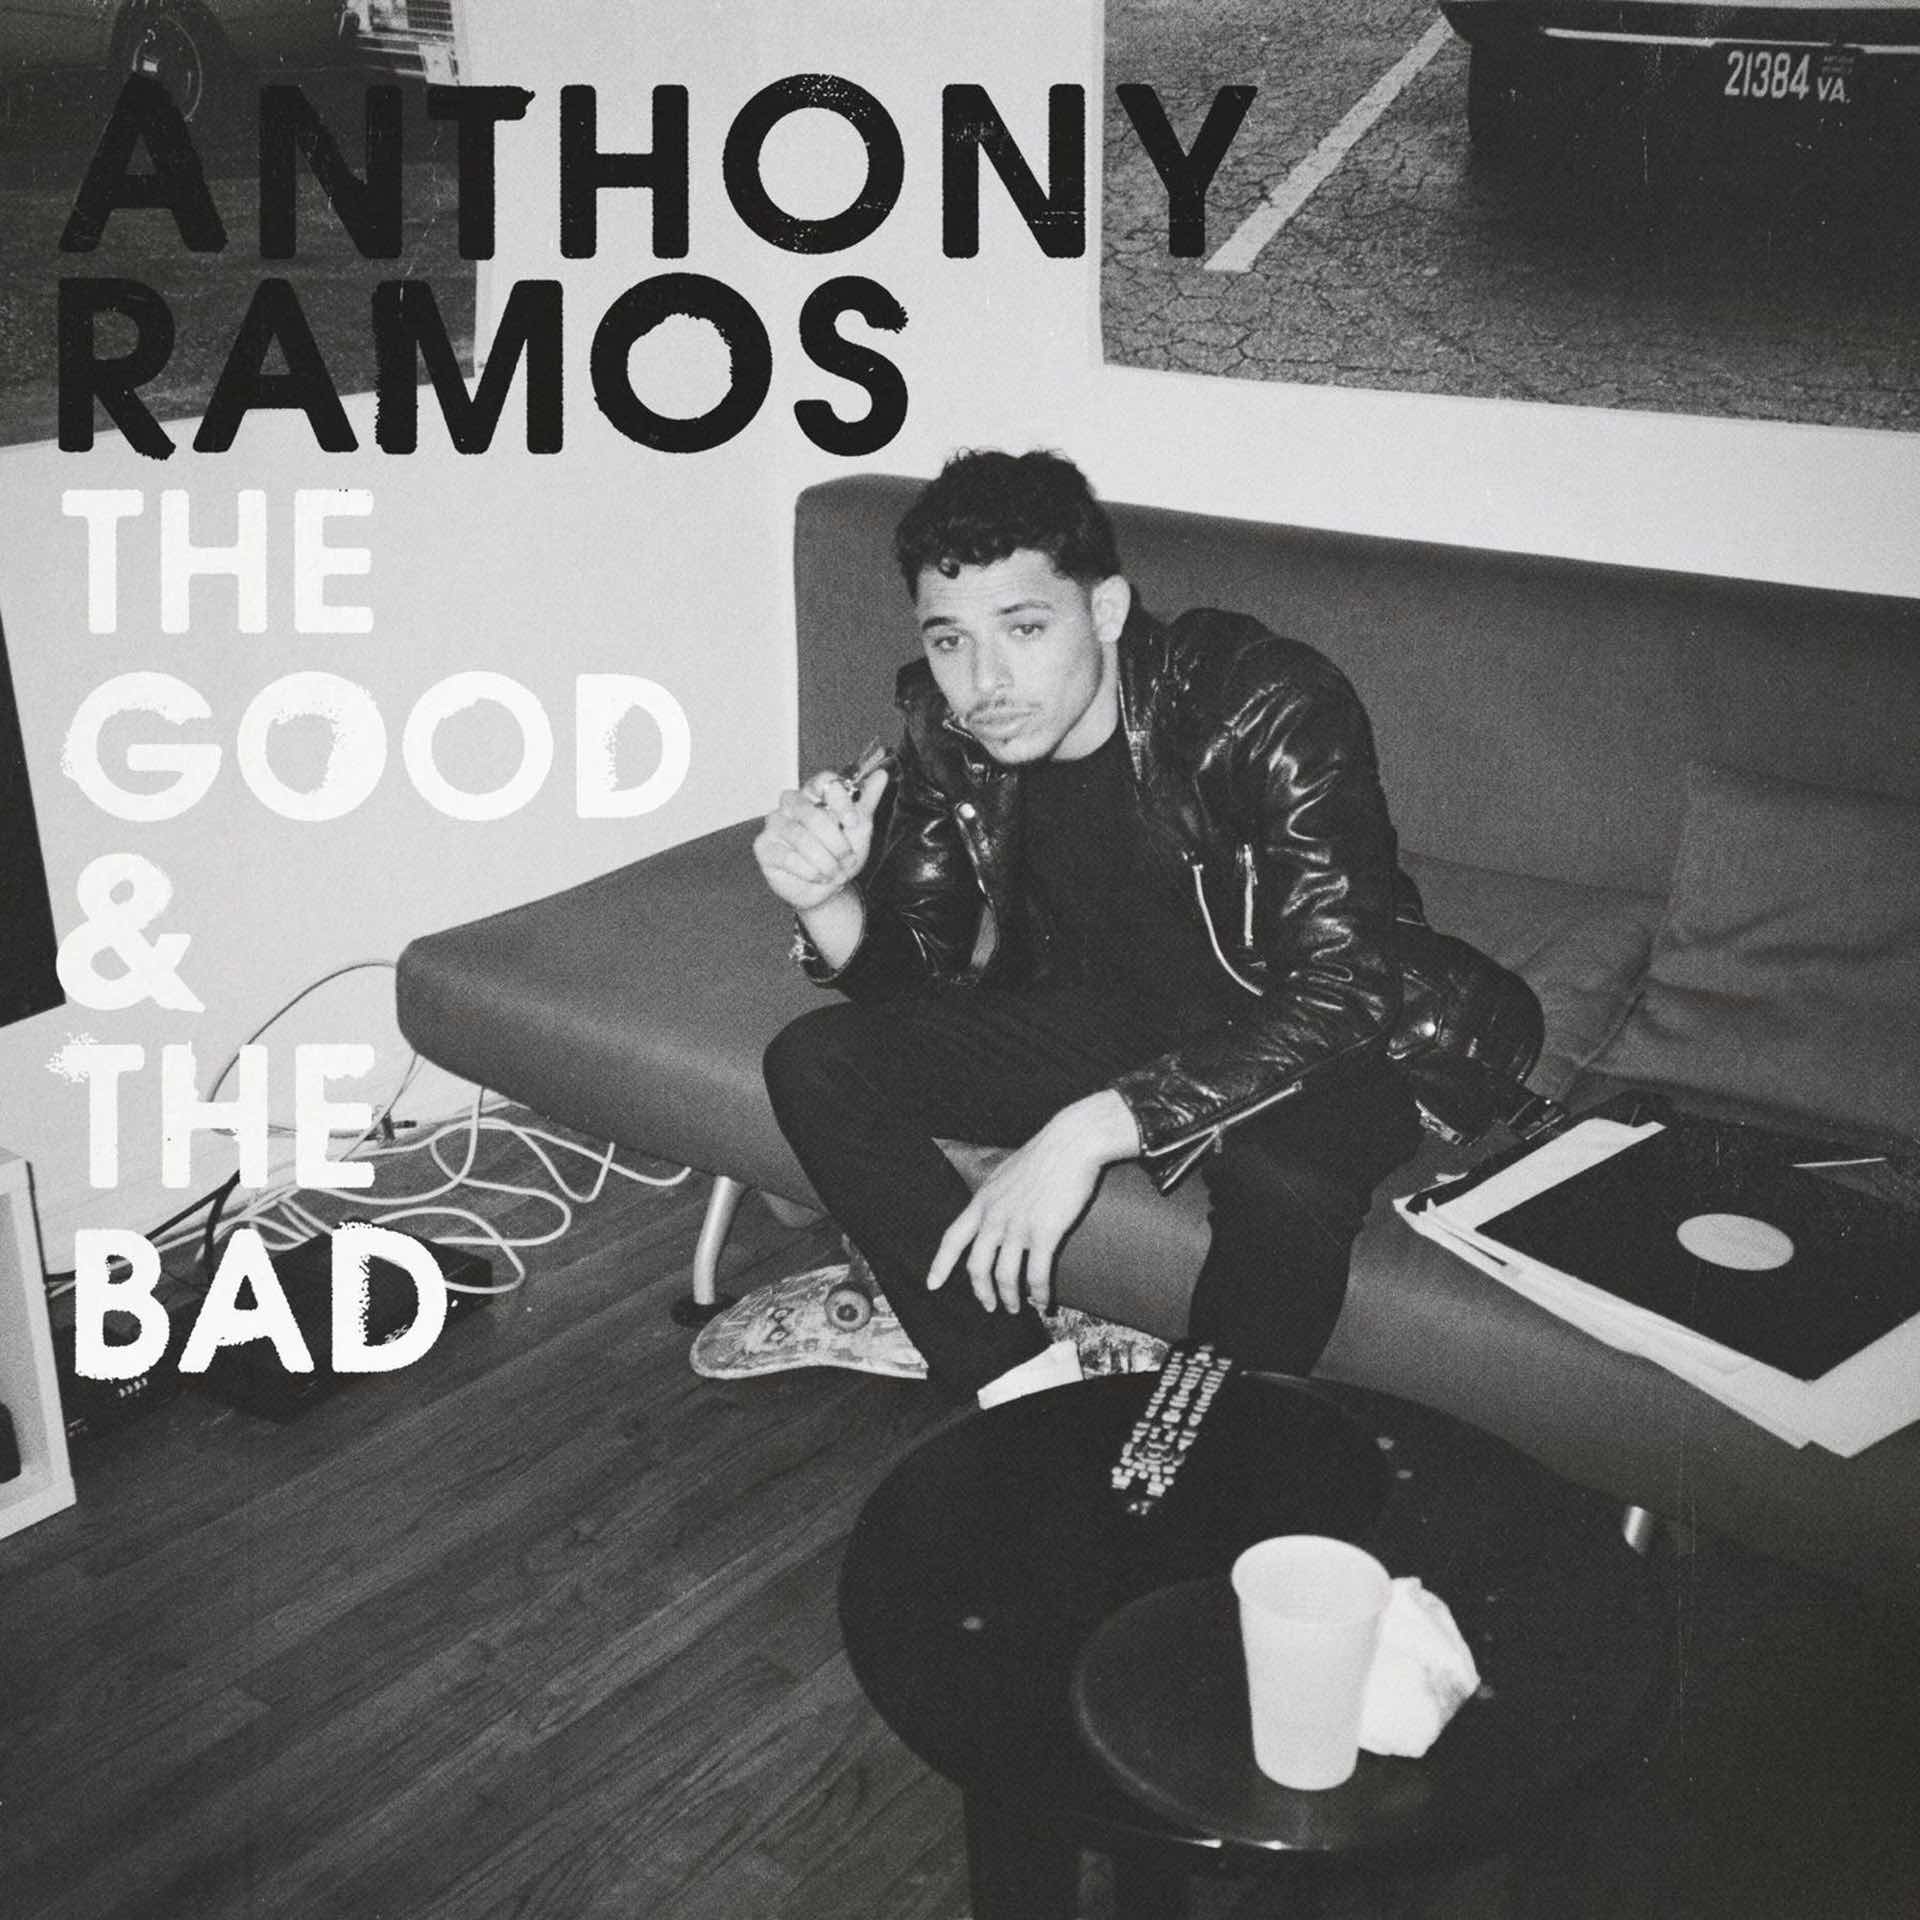 the-good-and-the-bad-album-by-anthony-ramos